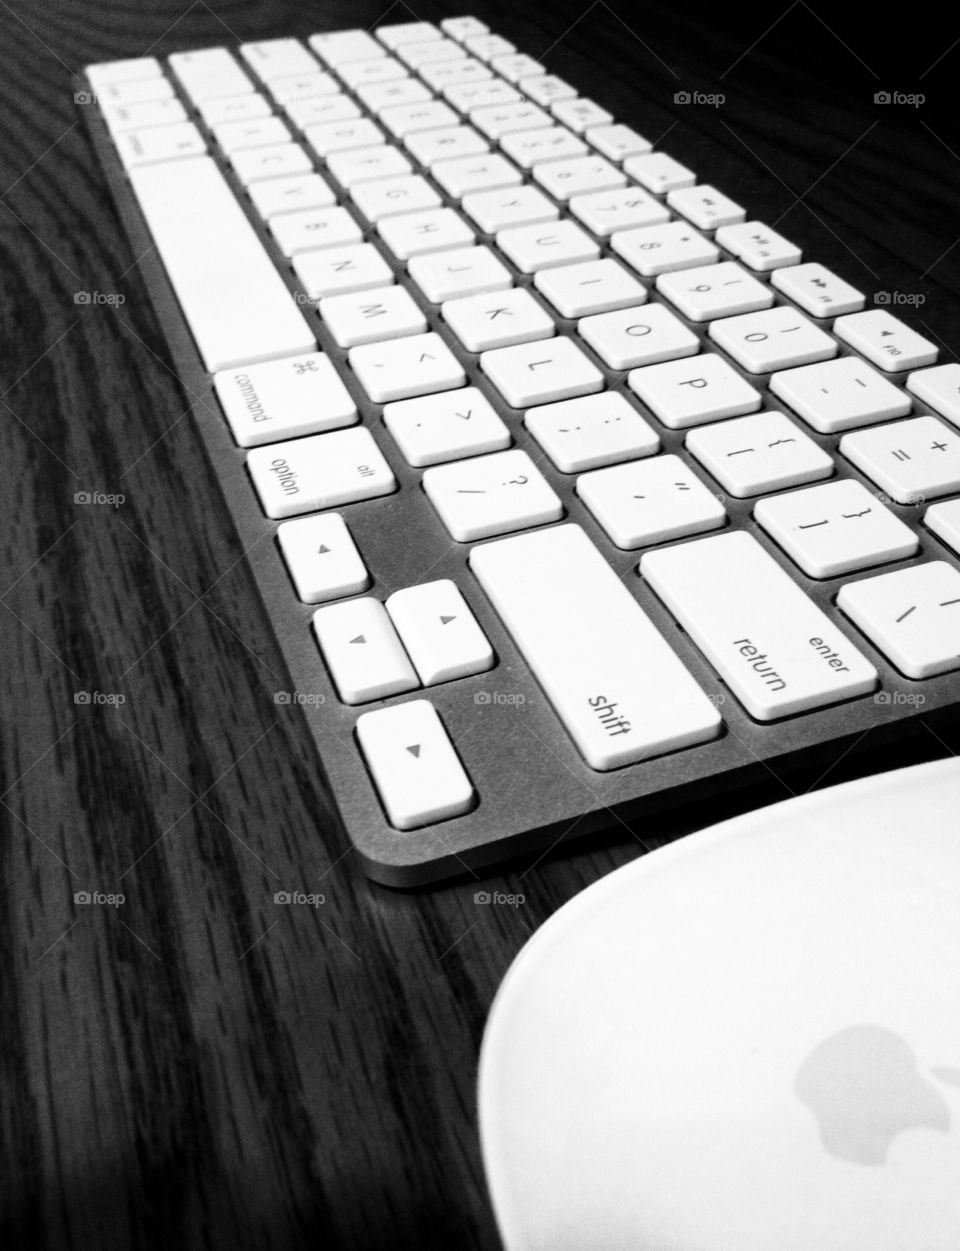 Keyboard and Mouse to MAC Apple Computer. B&W photo   Apple Keyboard & Mouse Wireless   MAC Apple Desktop Computer   Way of the Future   Wooden Desk